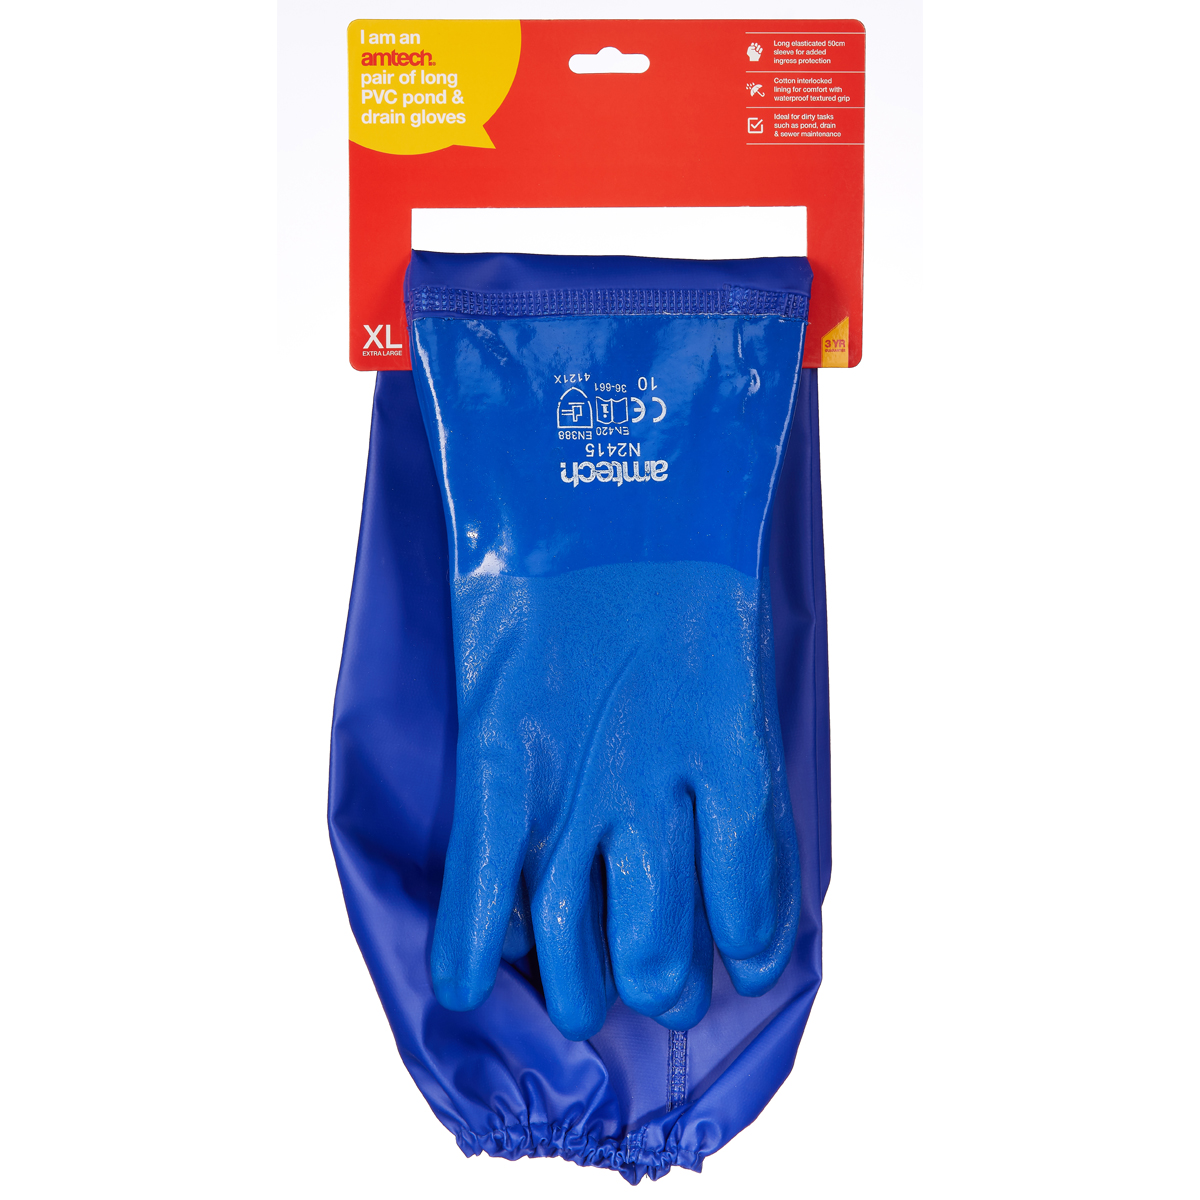 PVC Pond And Drain Protective Gloves Sleeve Waterproof Tough Heavy Duty LN6X 